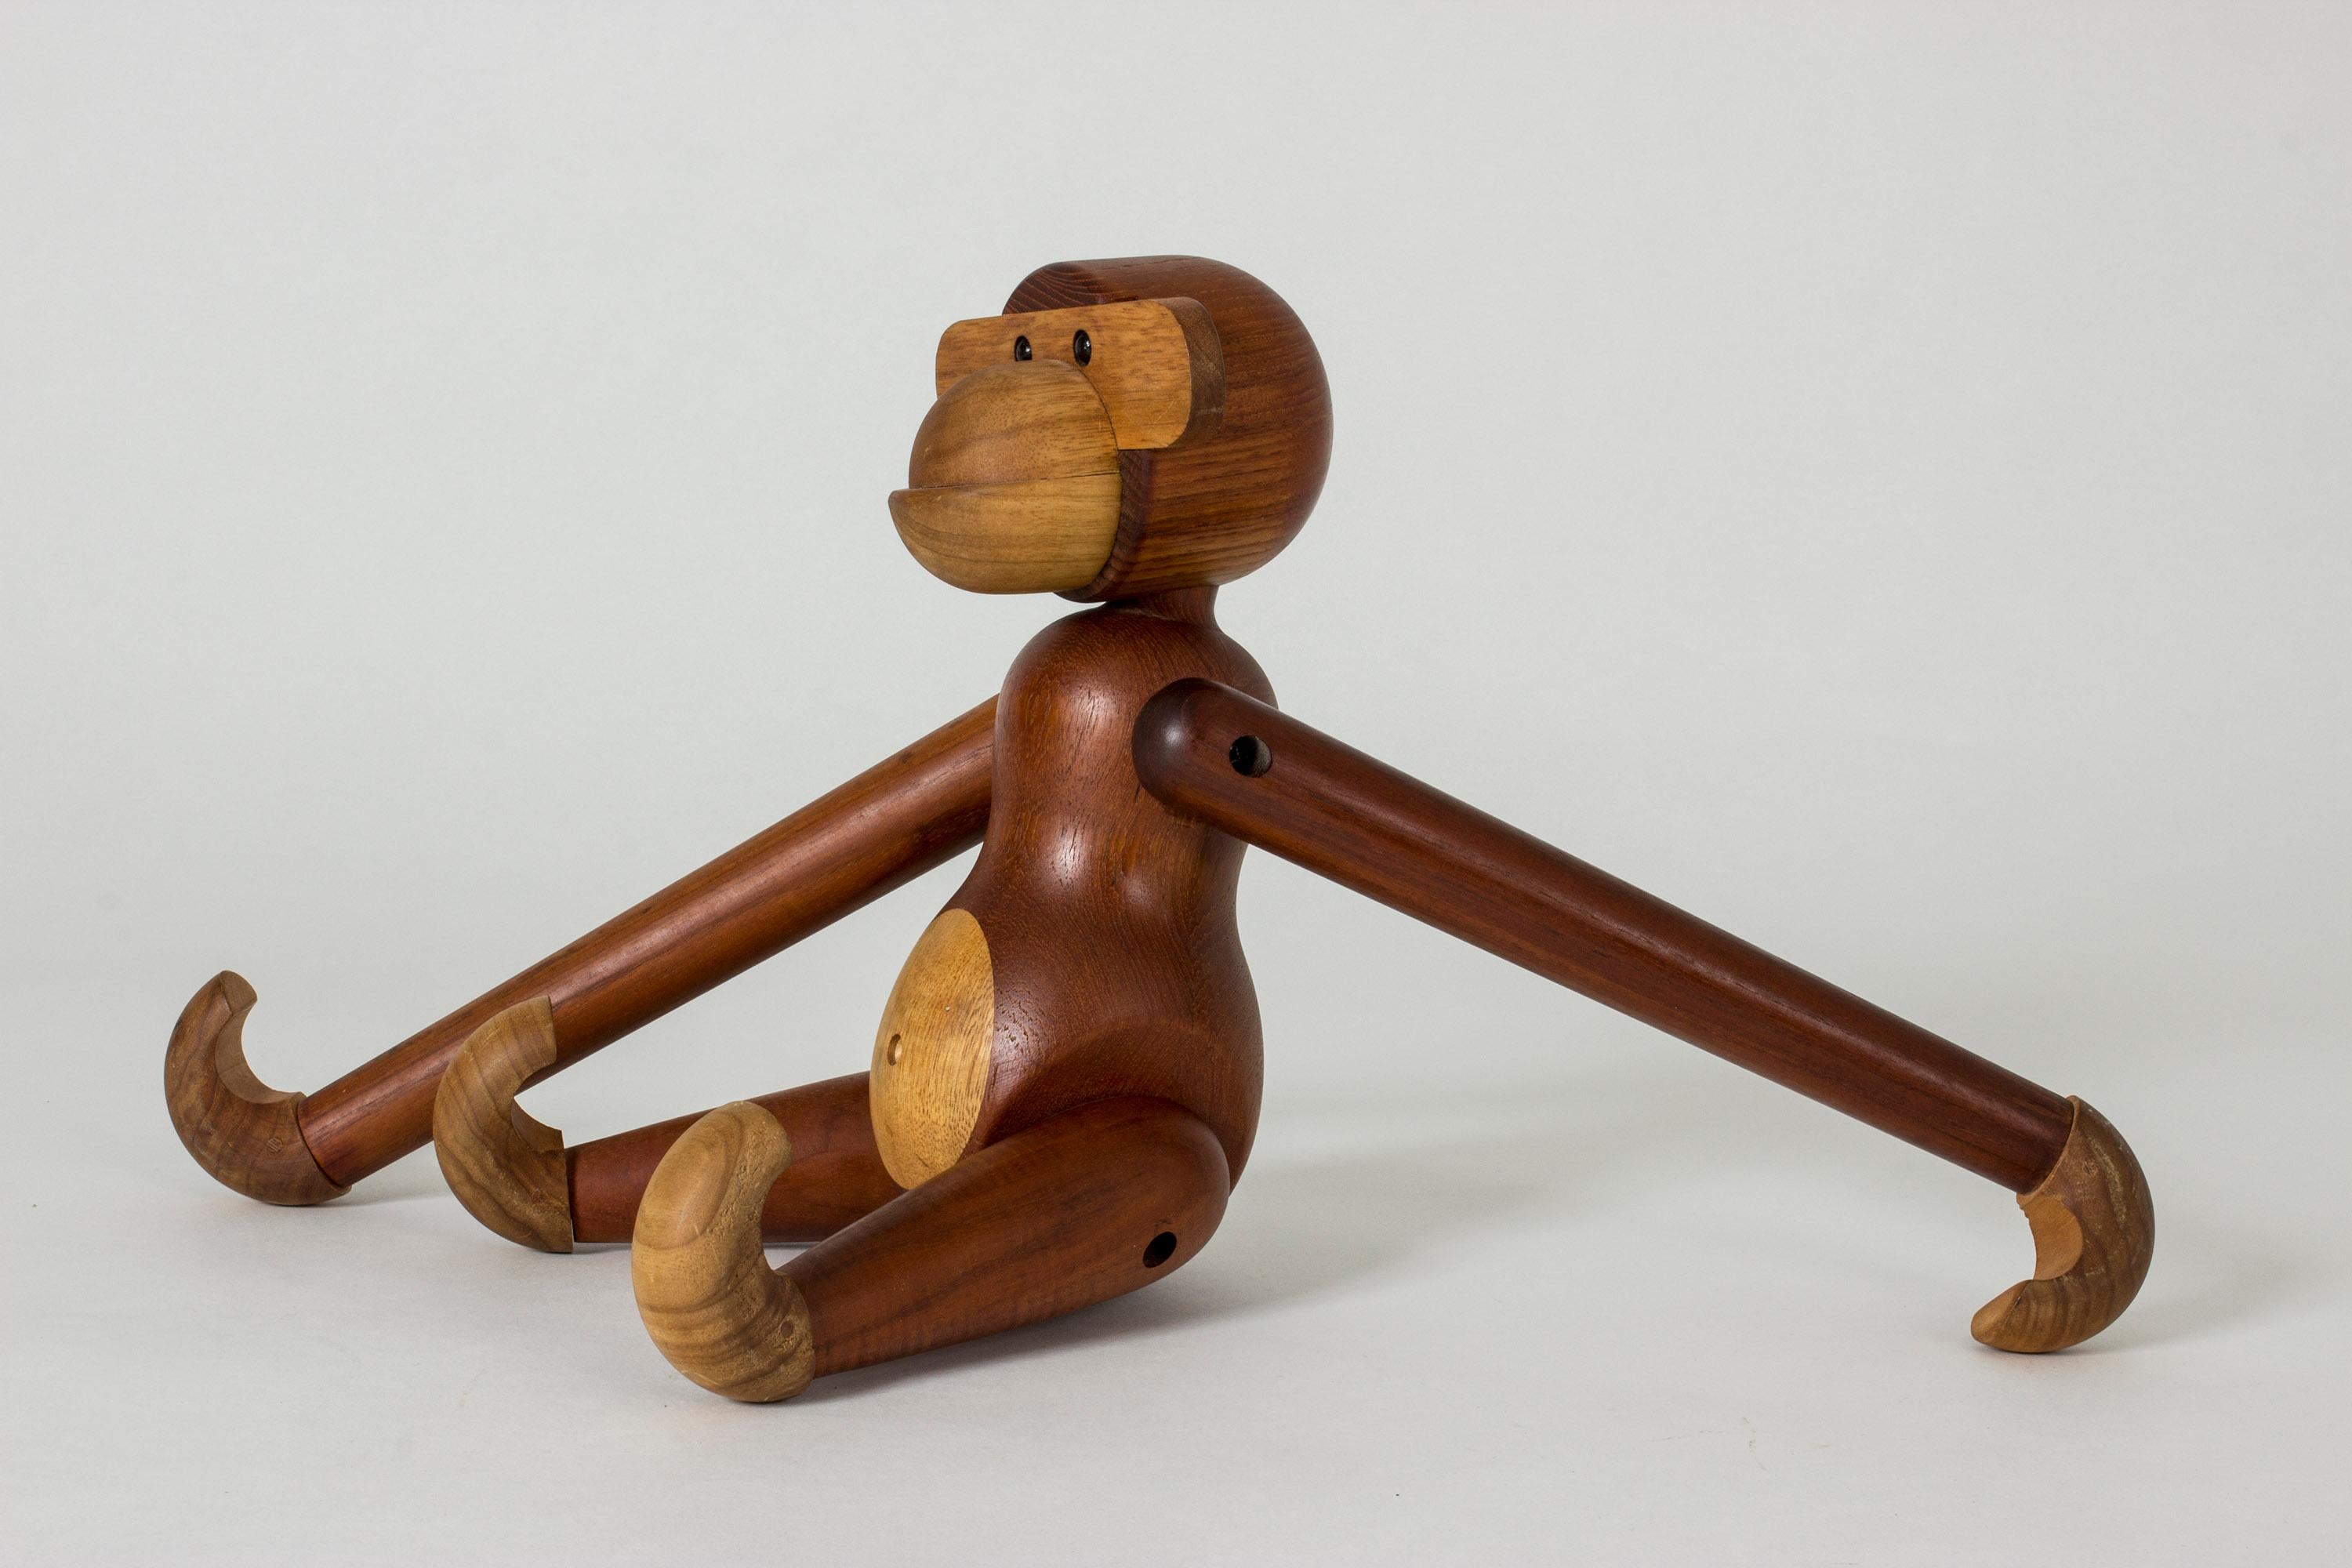 Large iconic teak monkey figurine by Kay Bojesen. Endearing, animated design. The limbs are fully movable and the monkey can hang by its hands or feet from a shelf or back of a chair.